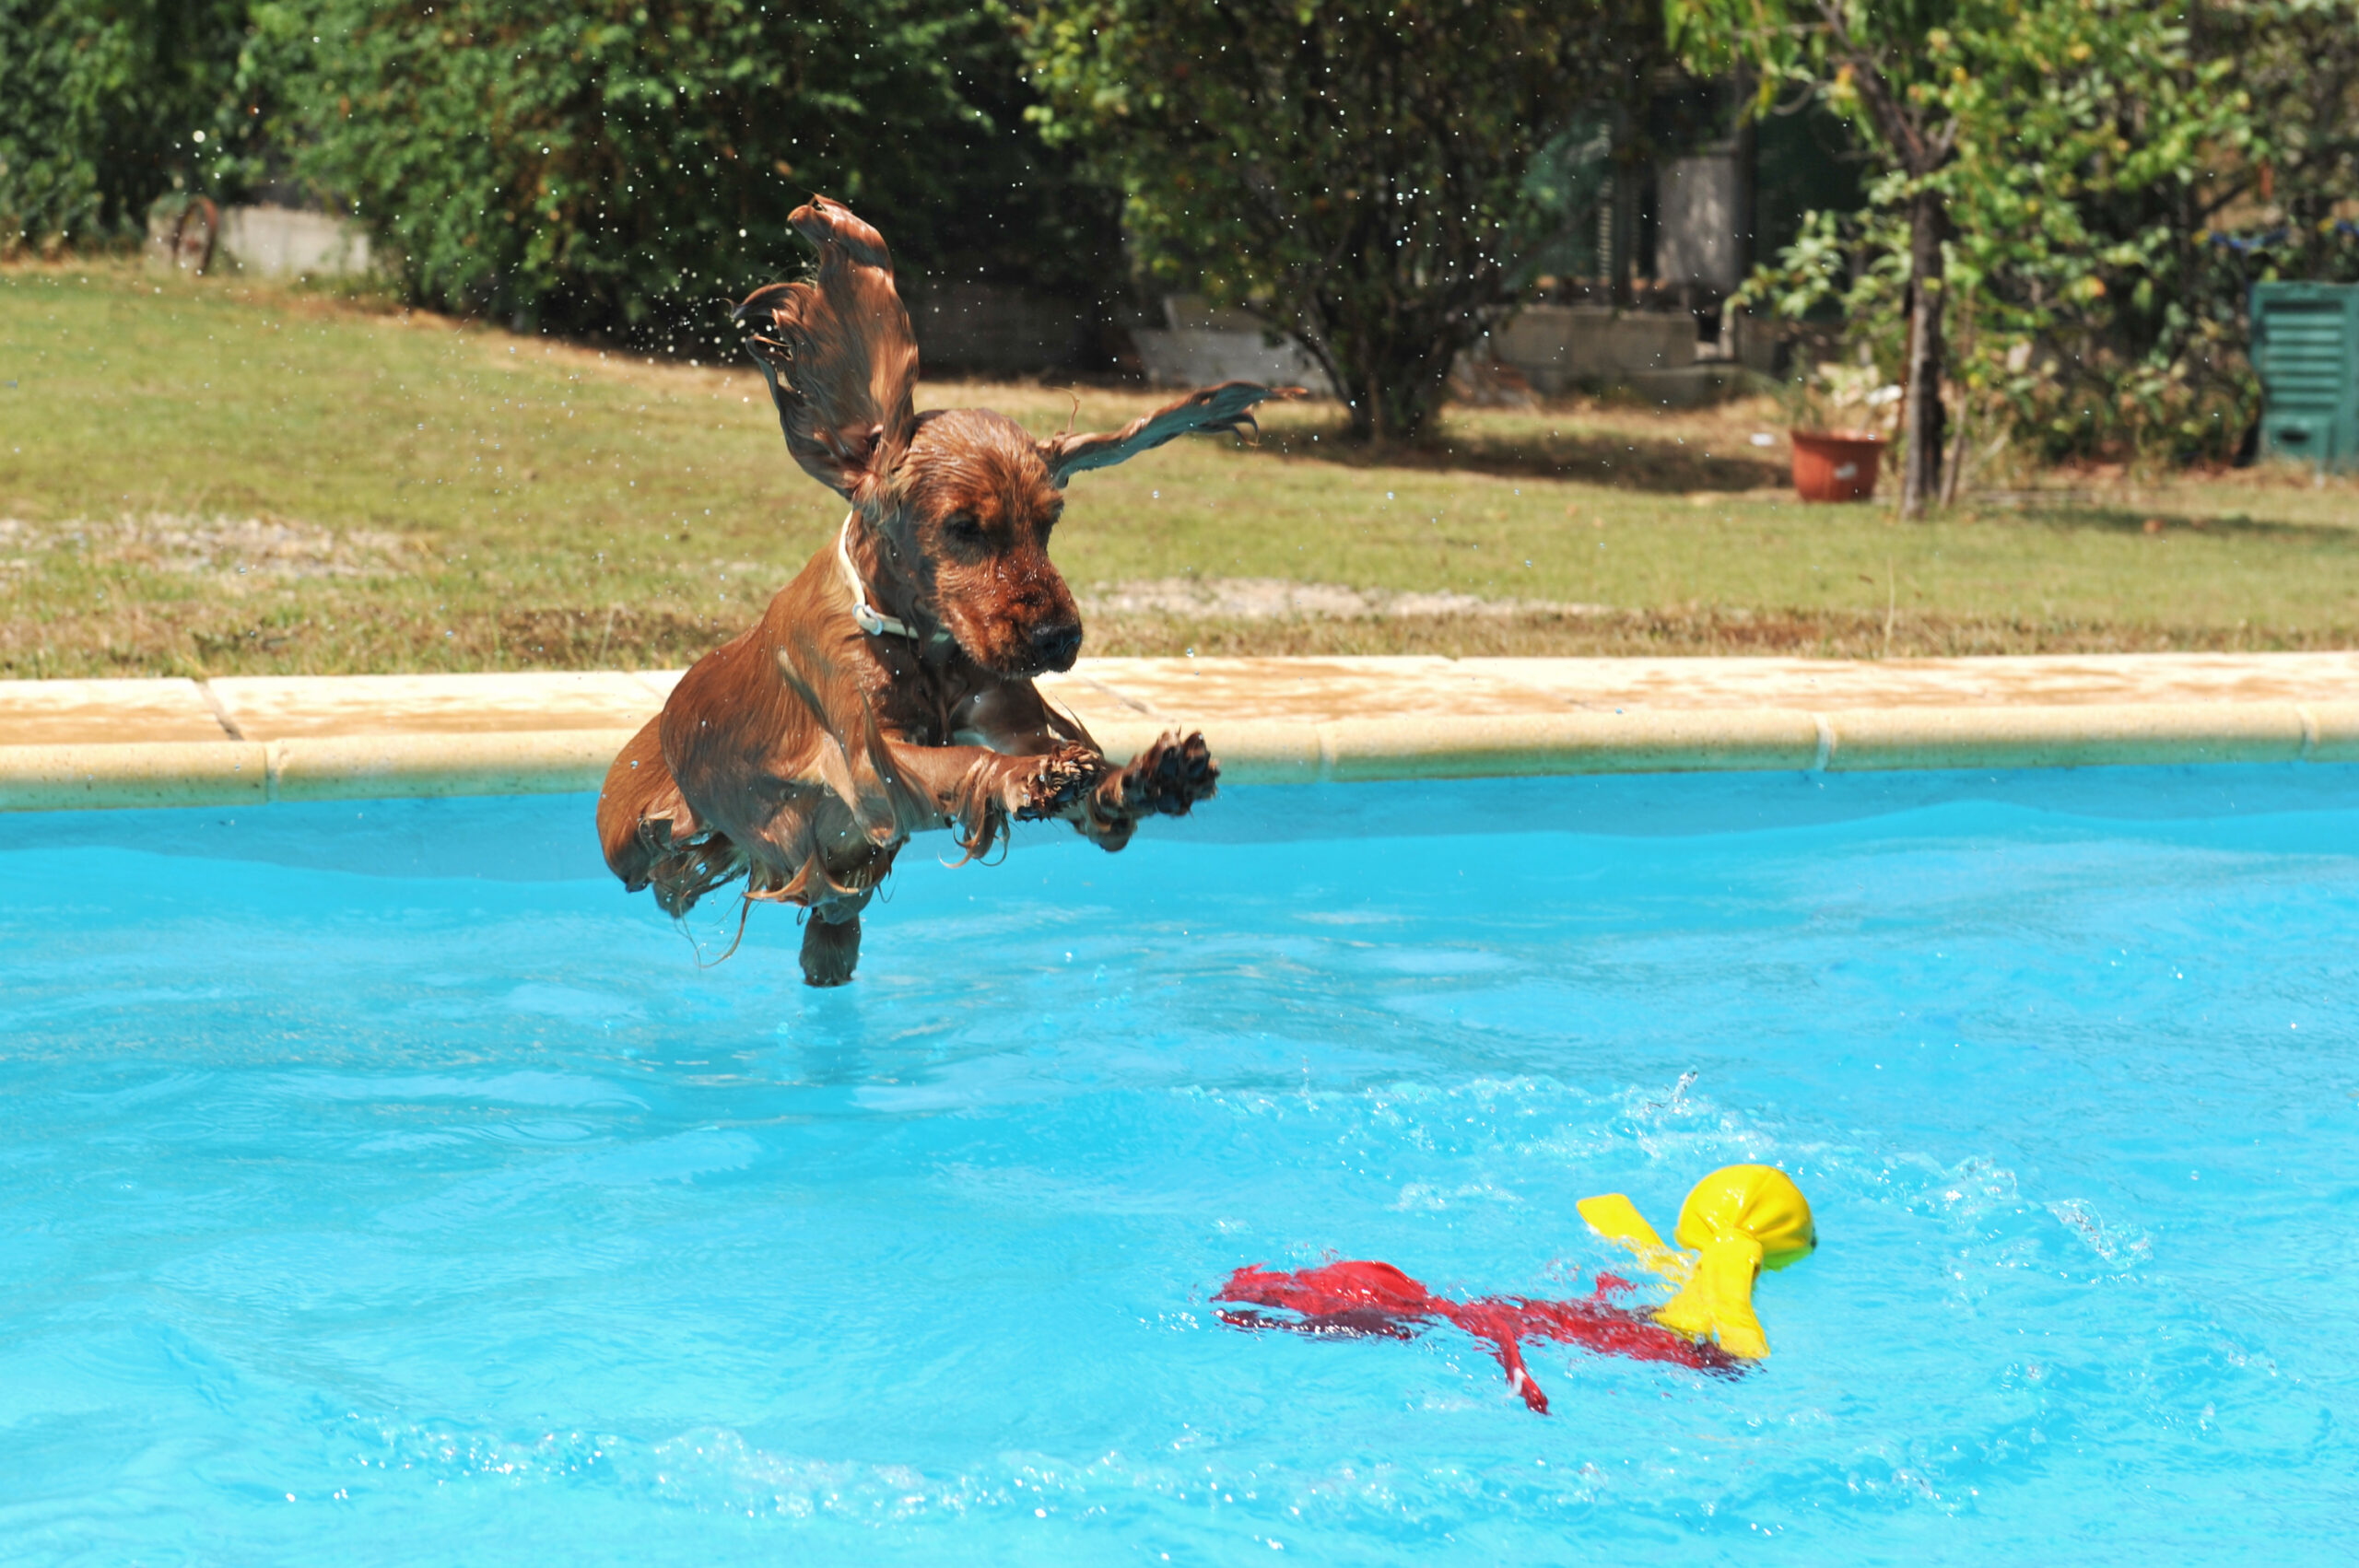 A dog leaping into a pool with enthusiasm and excitement.